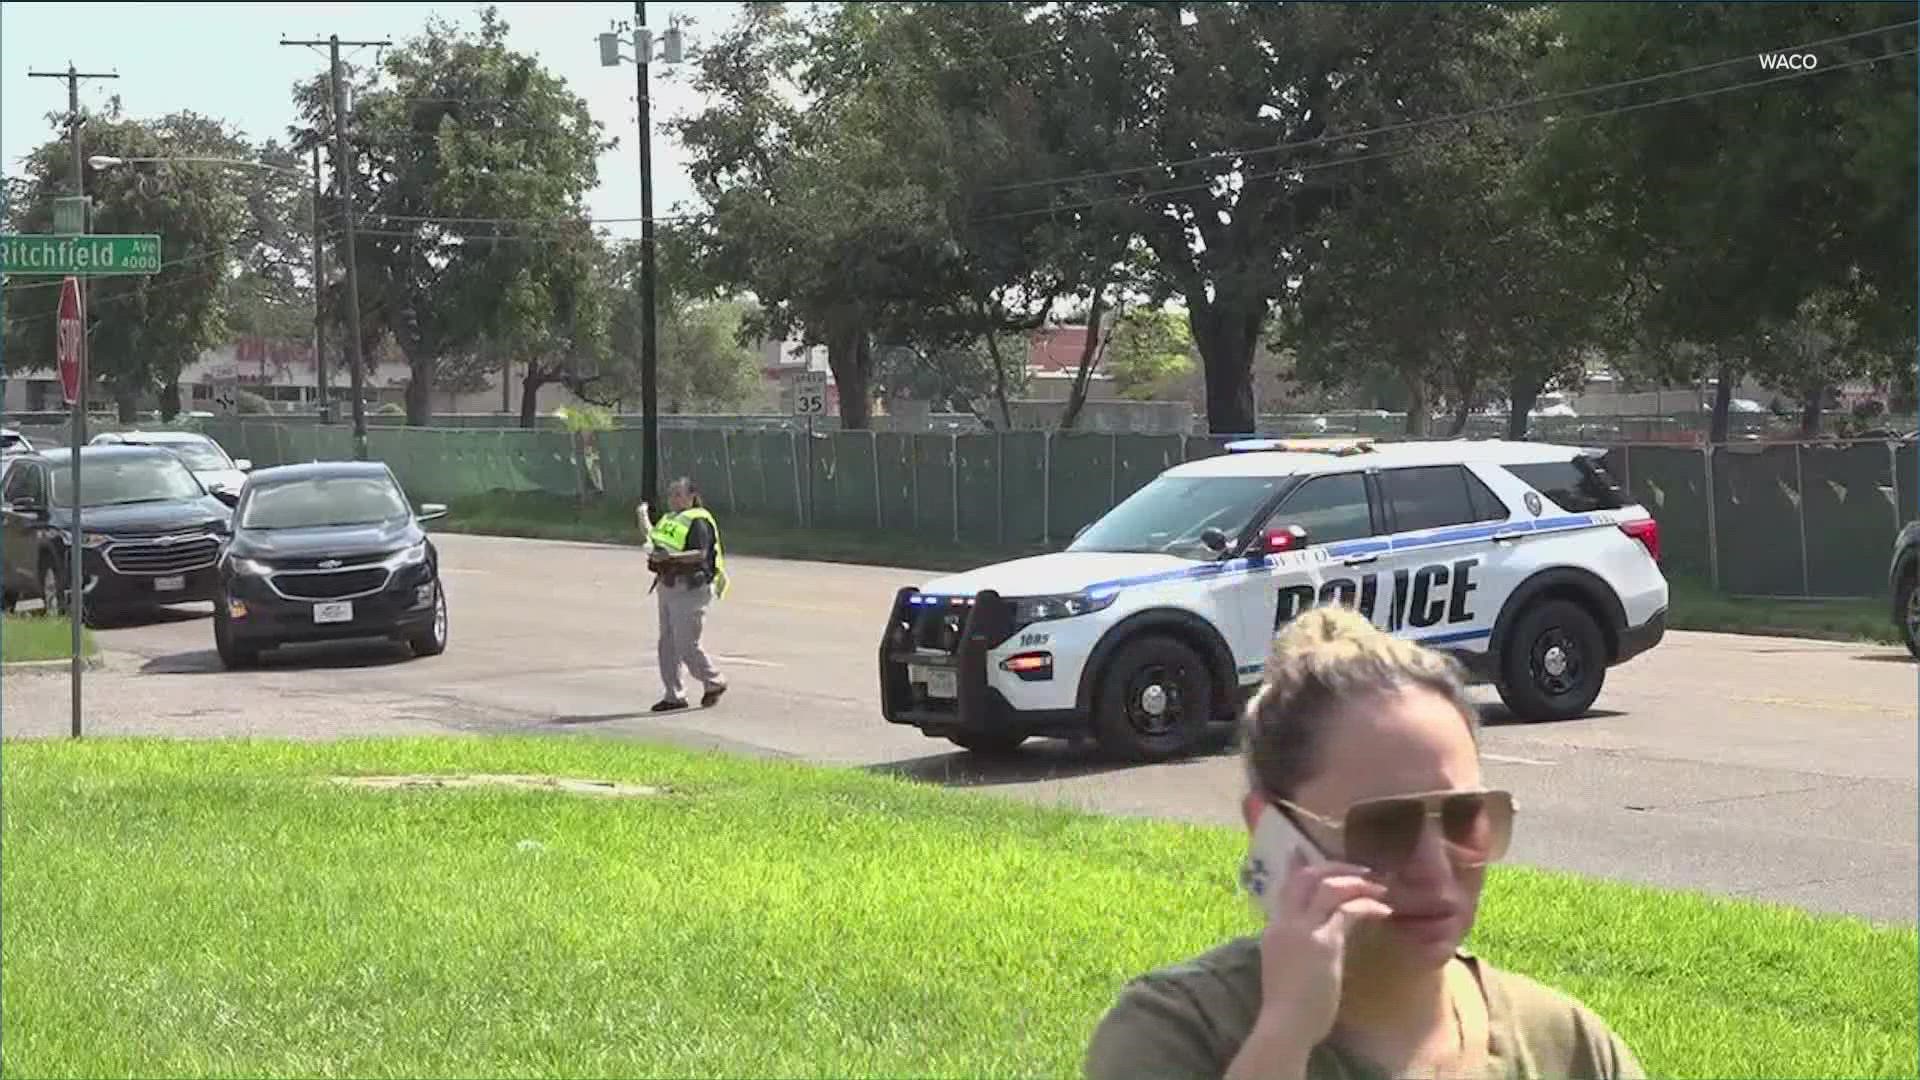 Officers across Texas responded to the threat of violence at several schools on Tuesday.